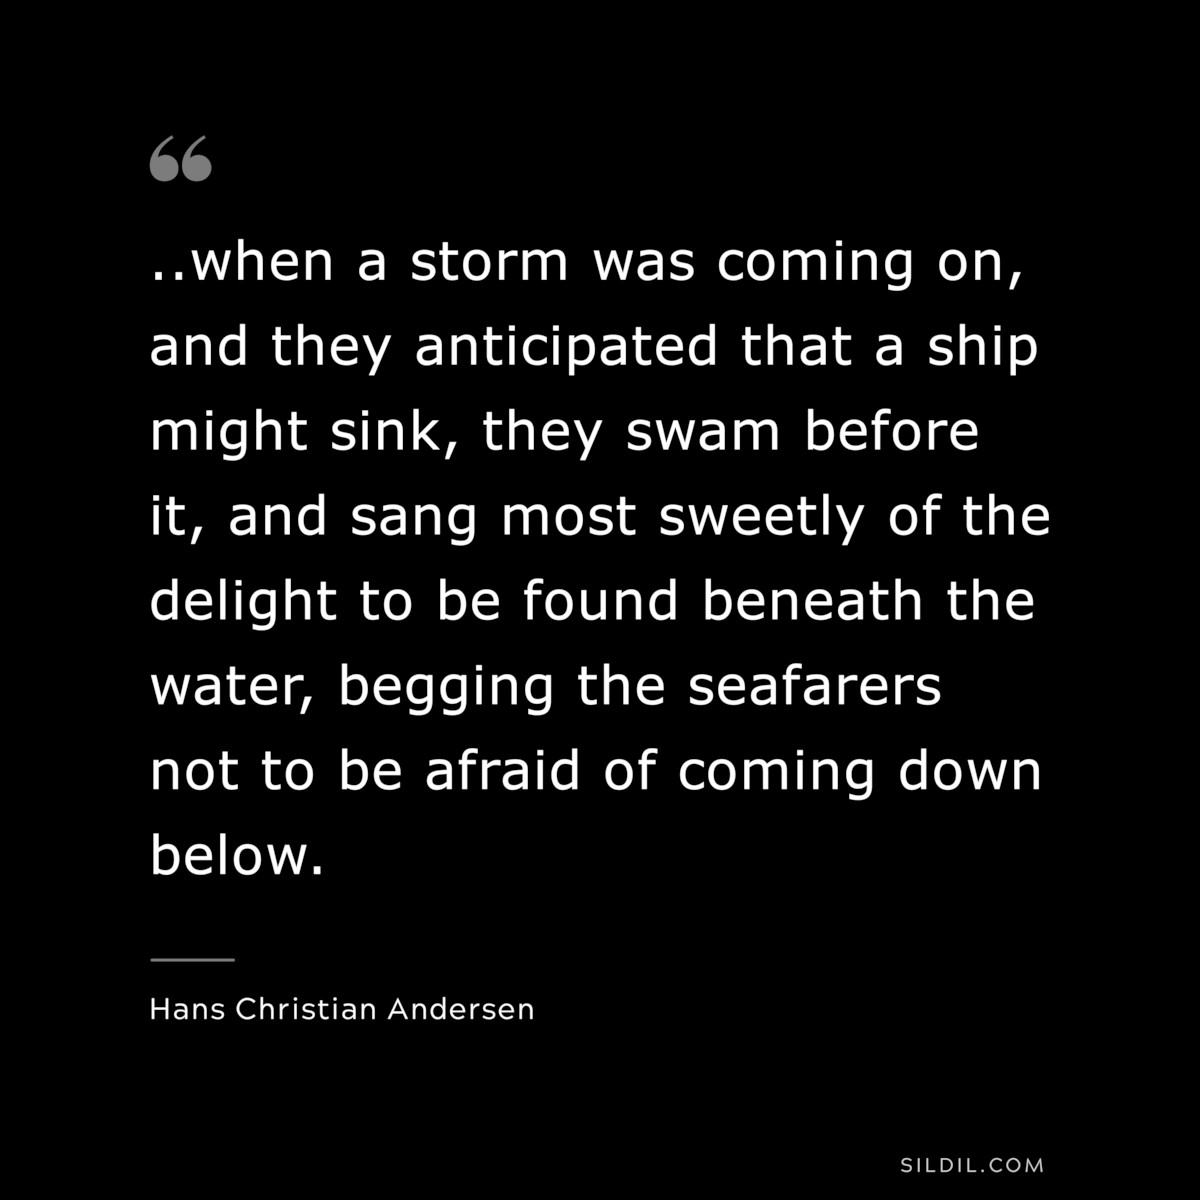 ...when a storm was coming on, and they anticipated that a ship might sink, they swam before it, and sang most sweetly of the delight to be found beneath the water, begging the seafarers not to be afraid of coming down below. ― Hans Christian Andersen